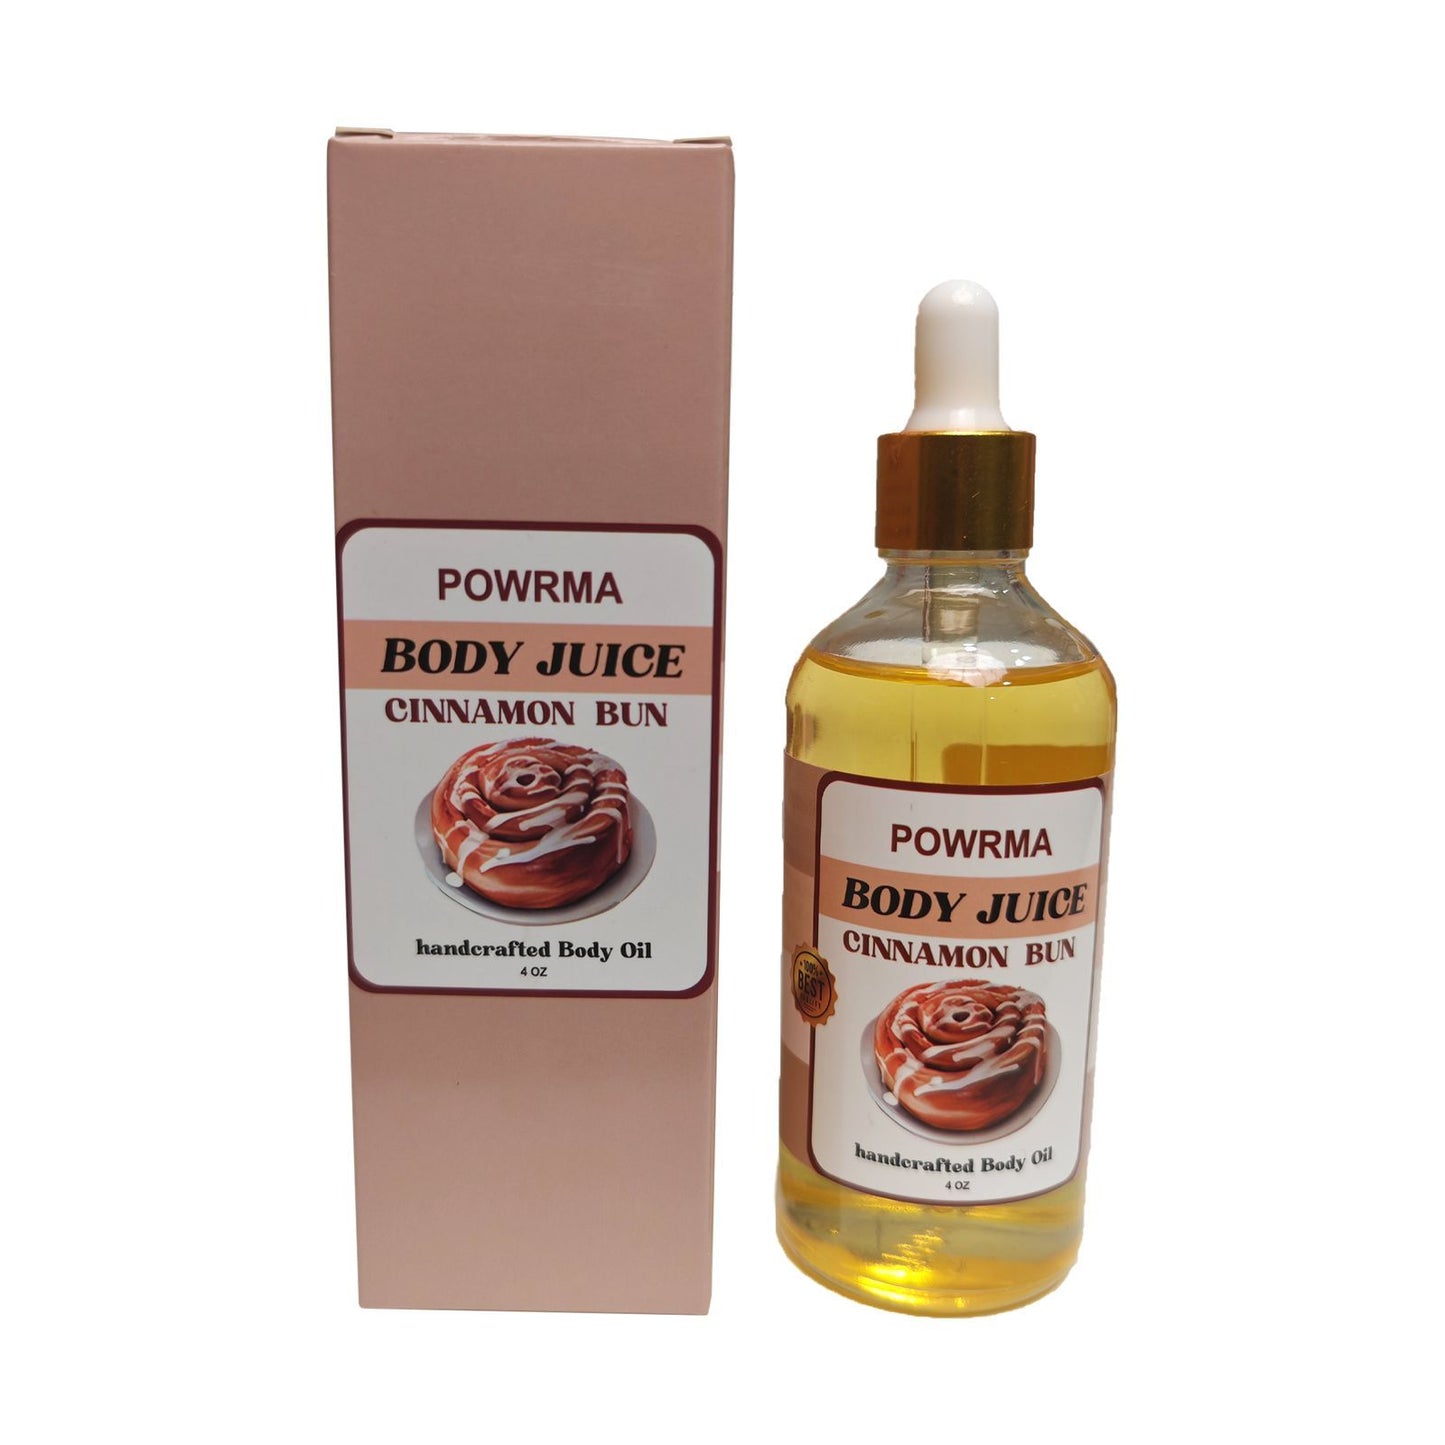 POWRMA Hand Crafted Body Juice Oil